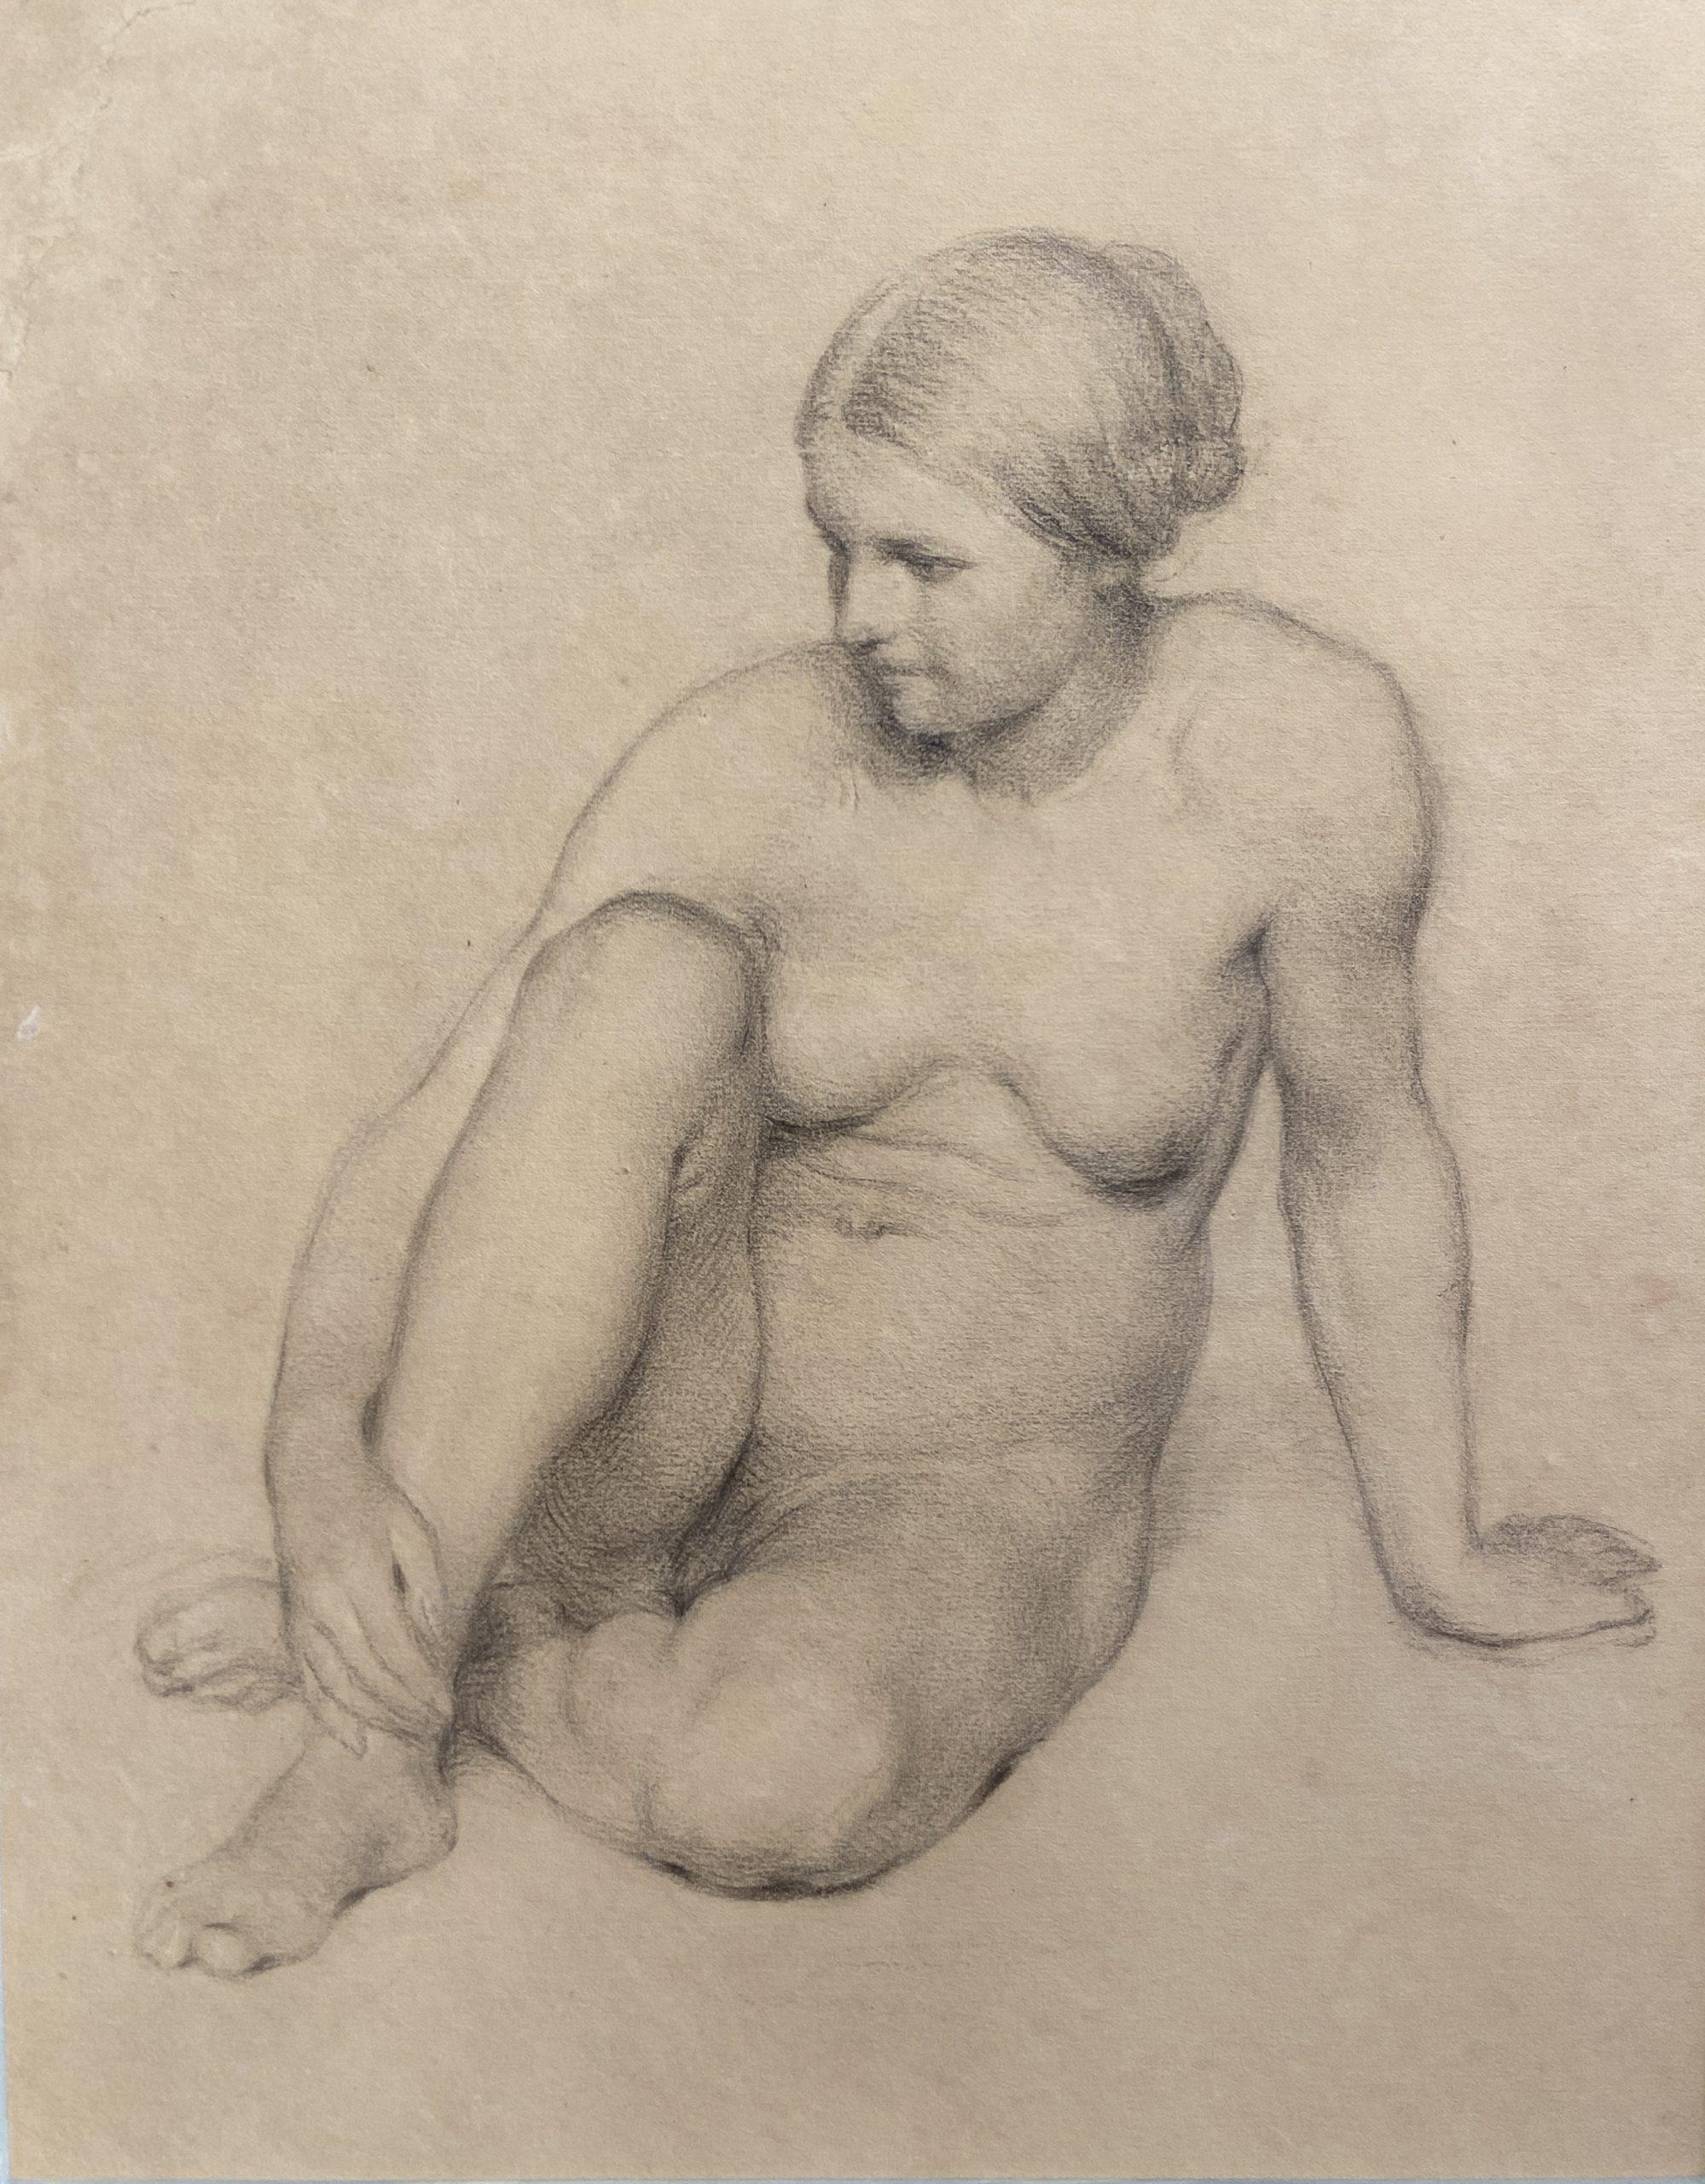 19th century French School Nude - Study of a Woman Sitting, Graphite Drawing, 19th Century French School